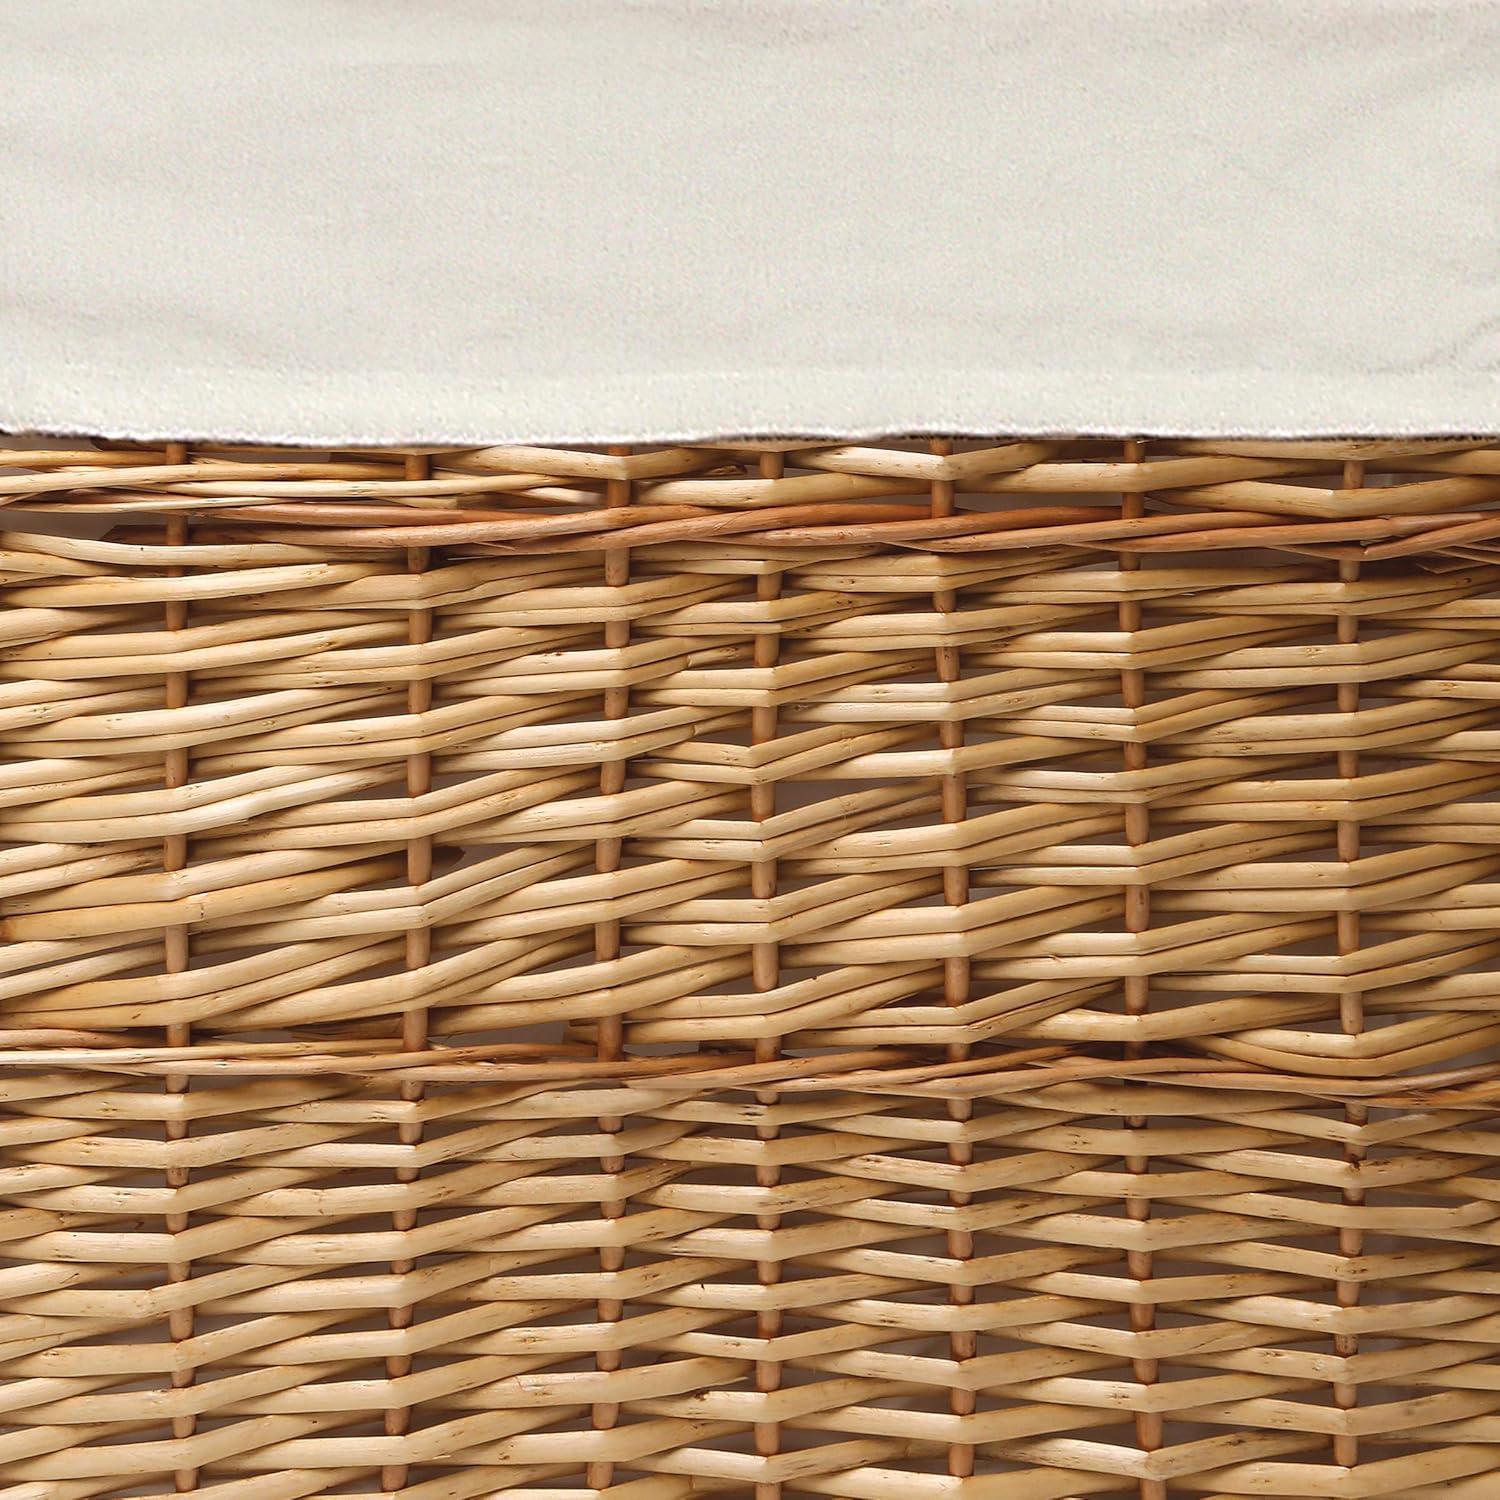 Eco-Friendly Stackable Wicker Hampers with Fabric Liners, Natural Ecru